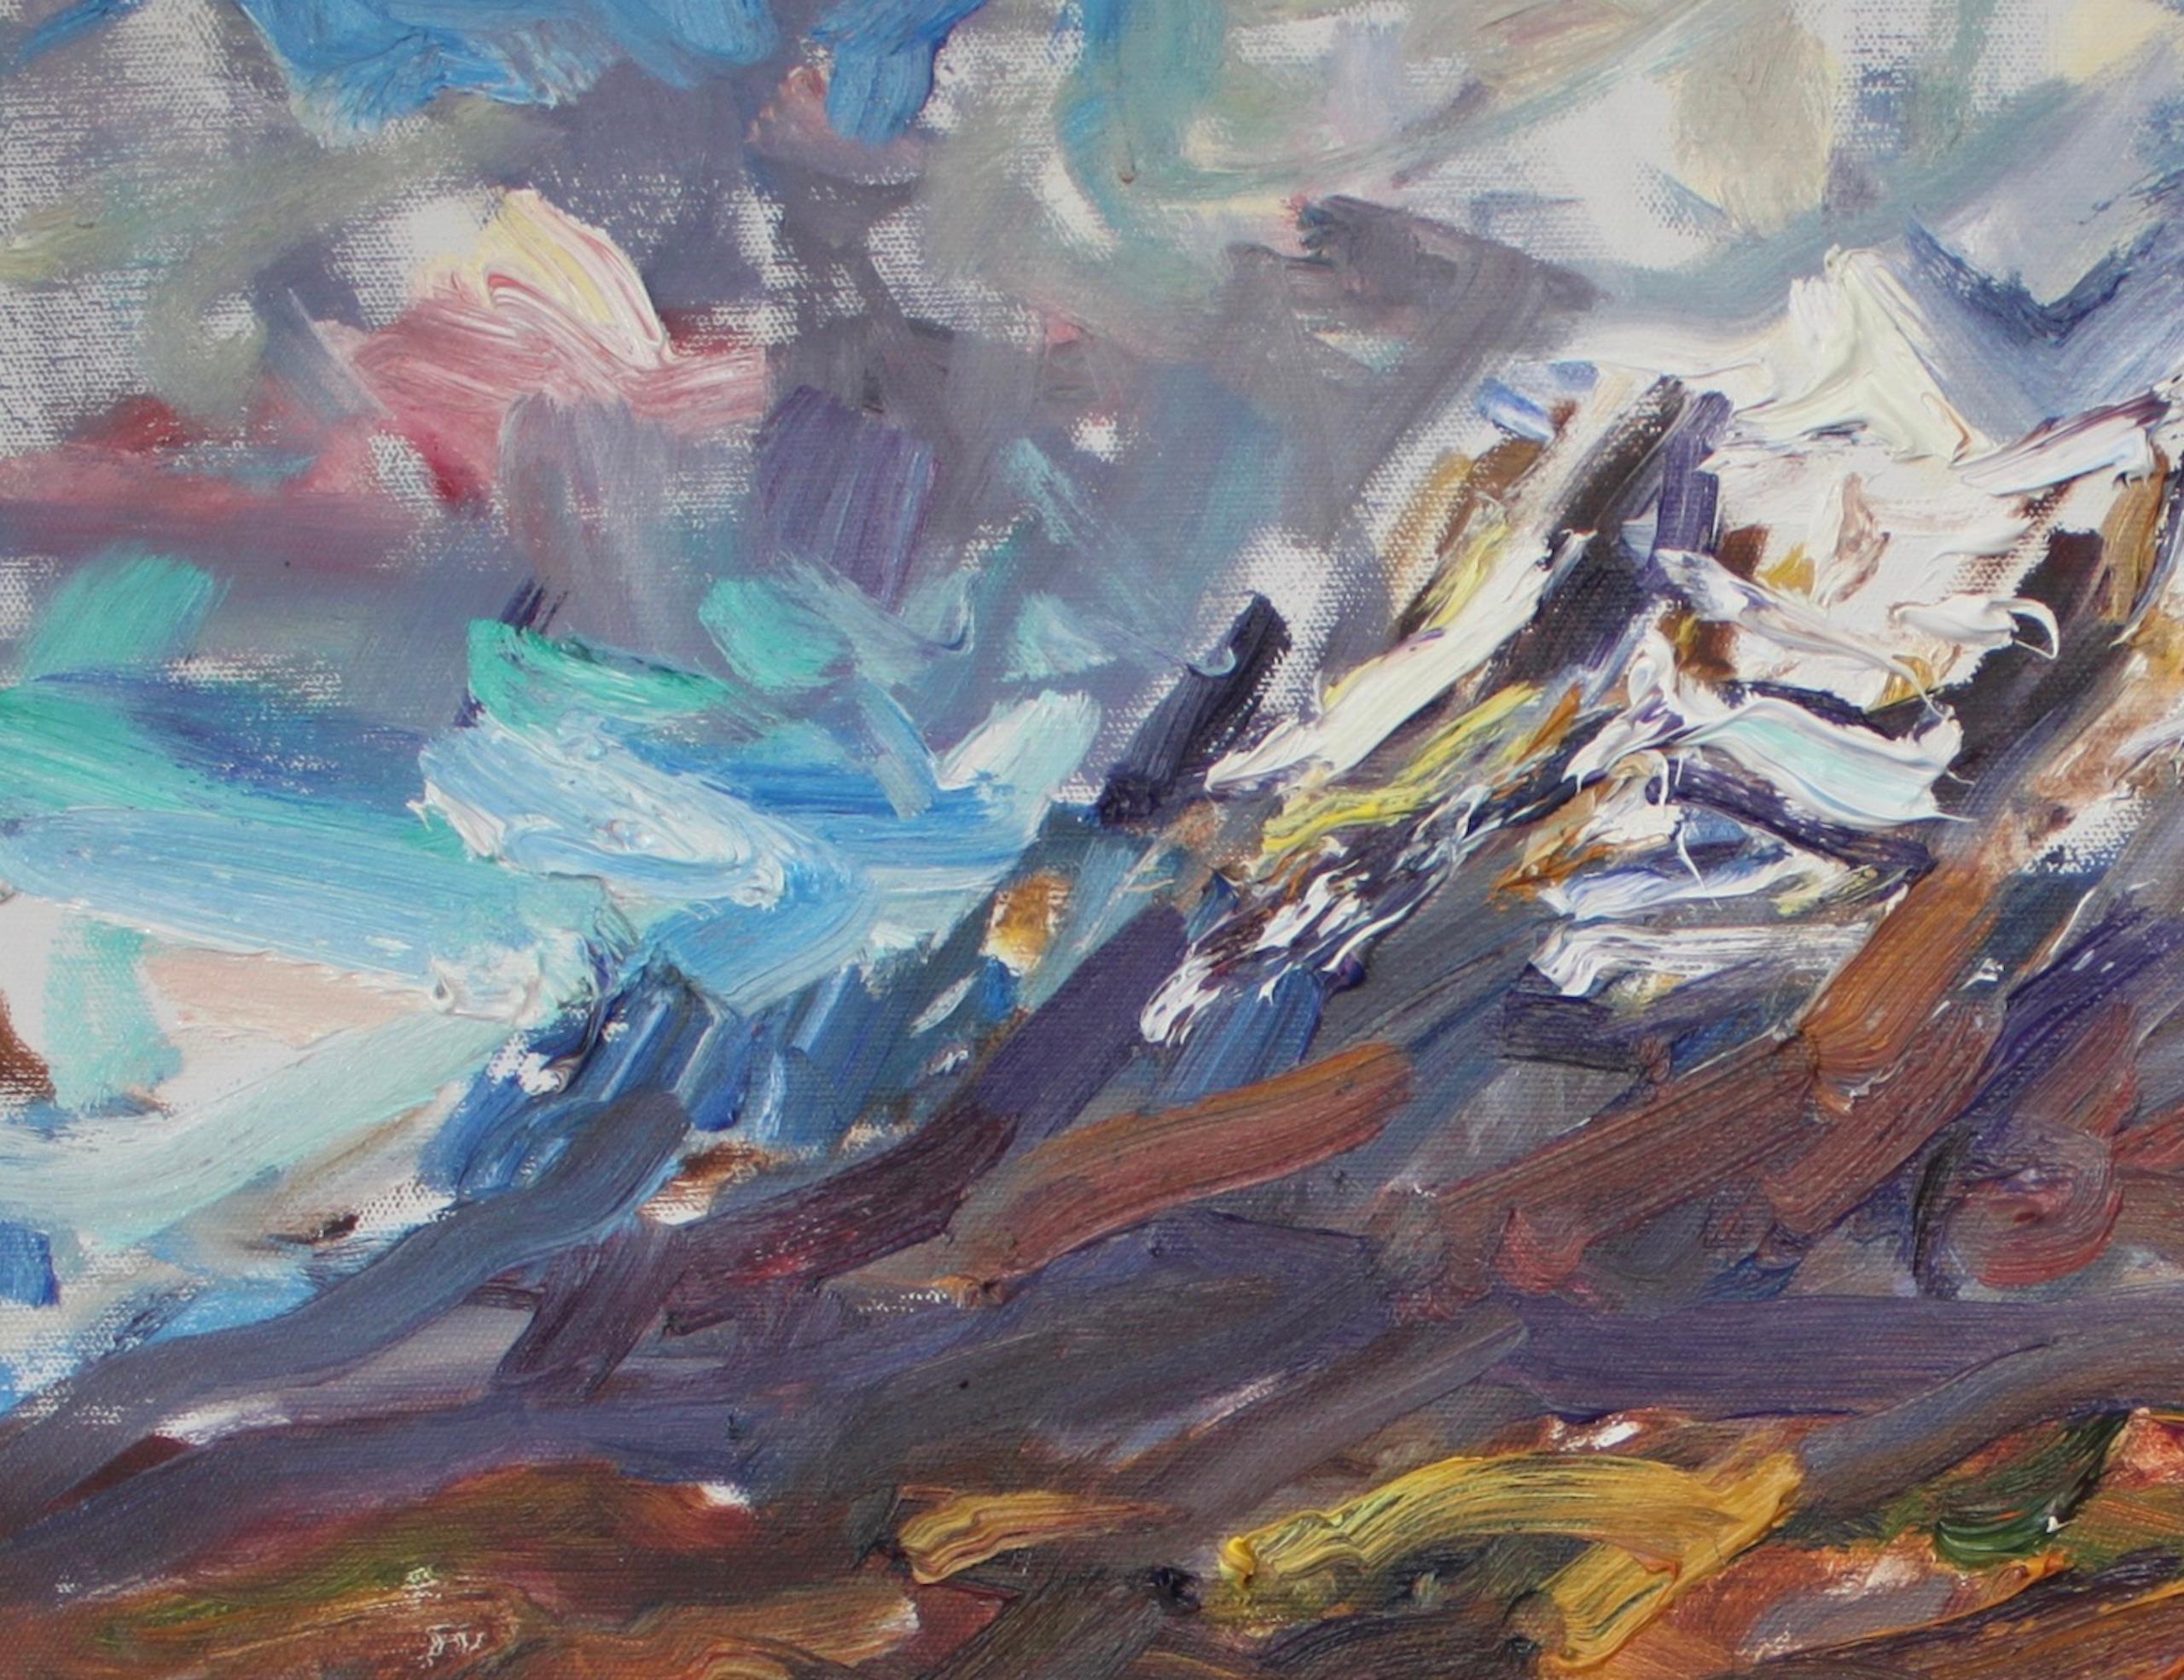 Liathach Reflection by Jonathan Shearer - Landscape oil painting, mountain, sky For Sale 2